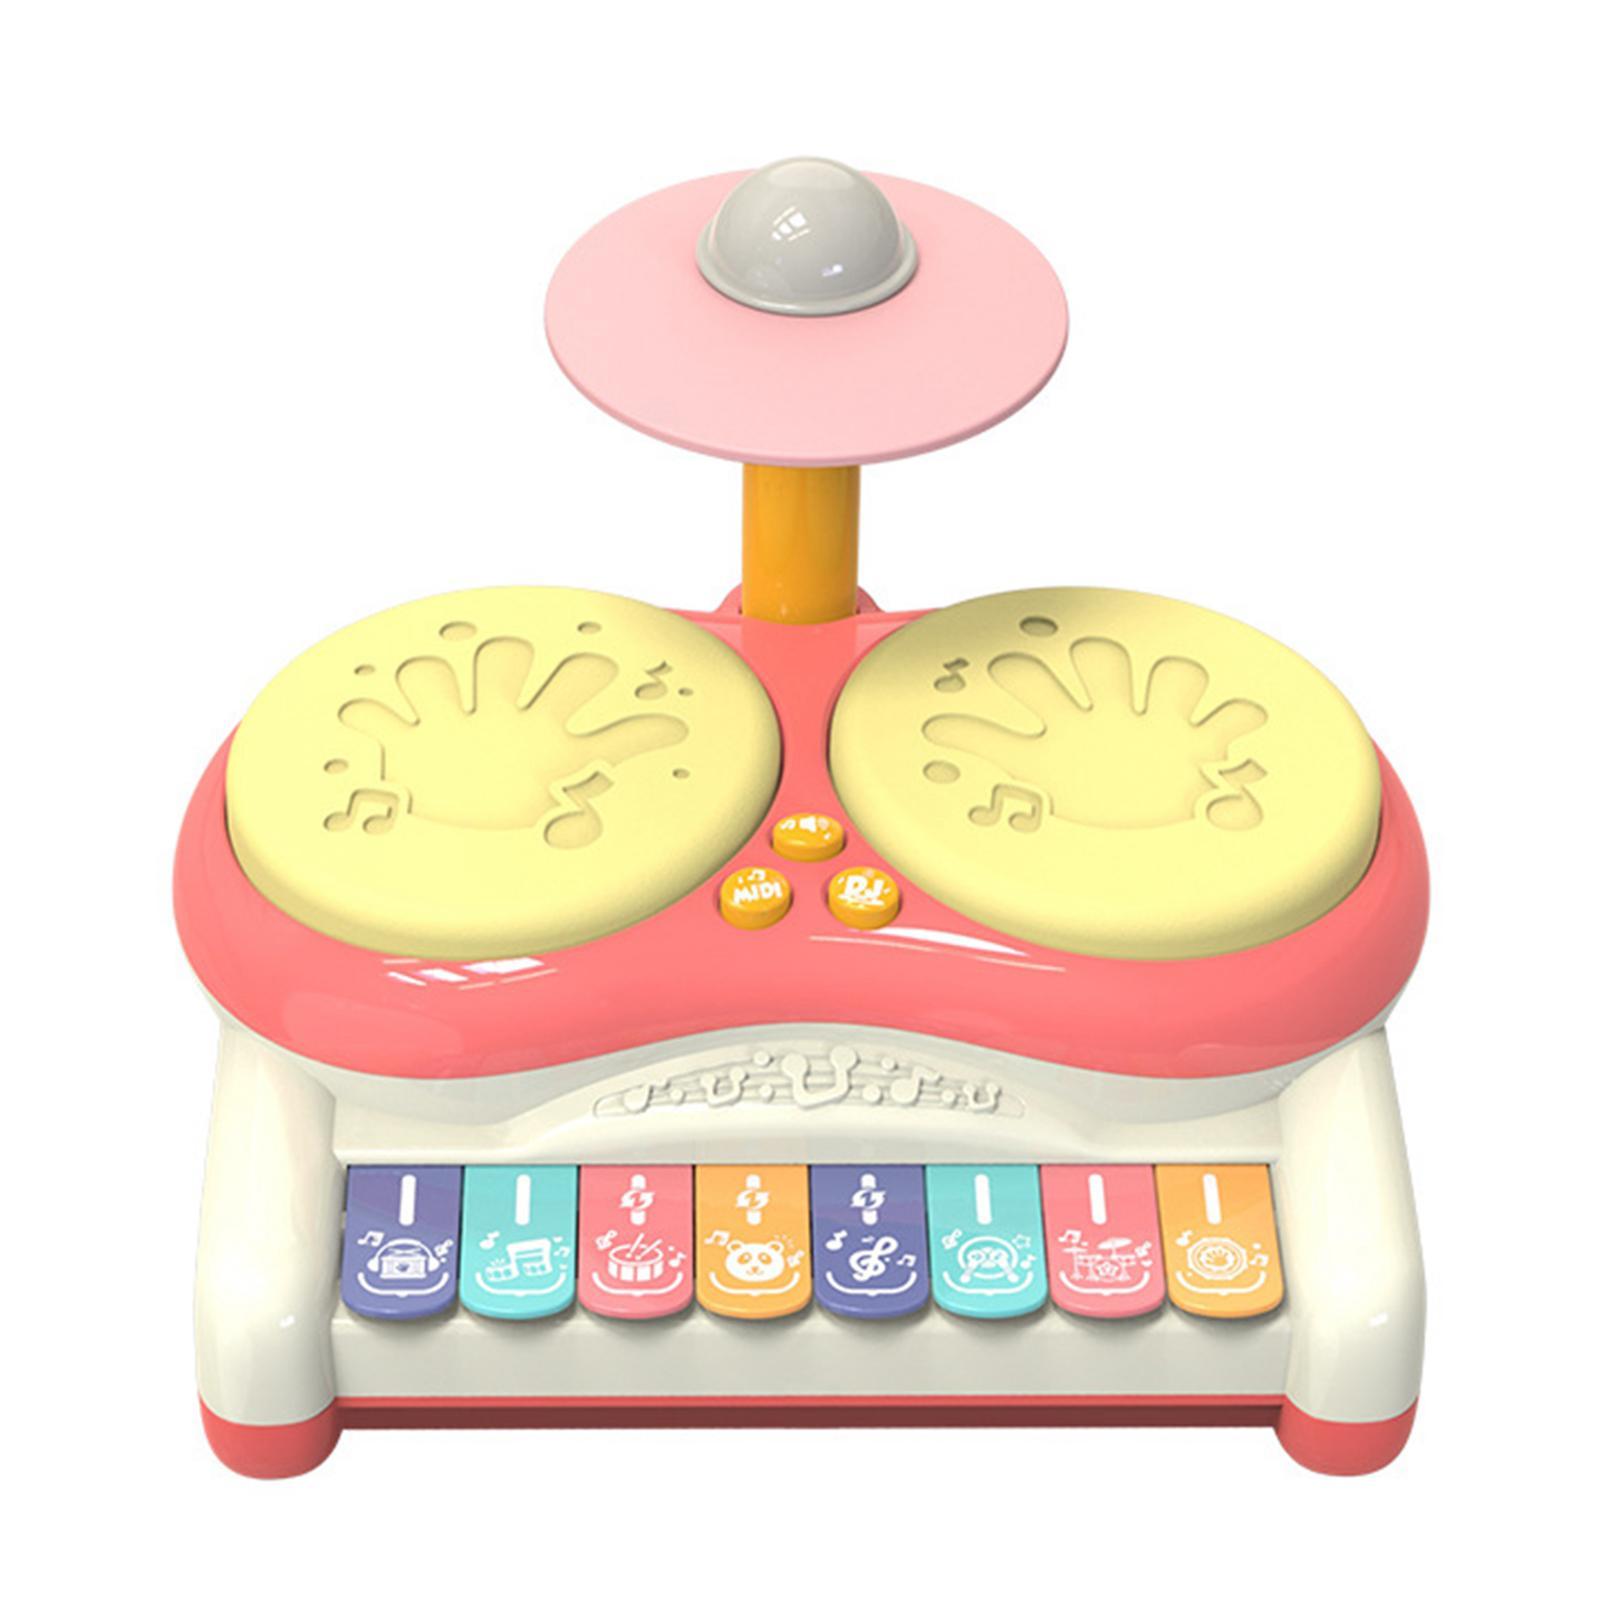 Drum Toy Early Education Musical Toy Training Educational for Child